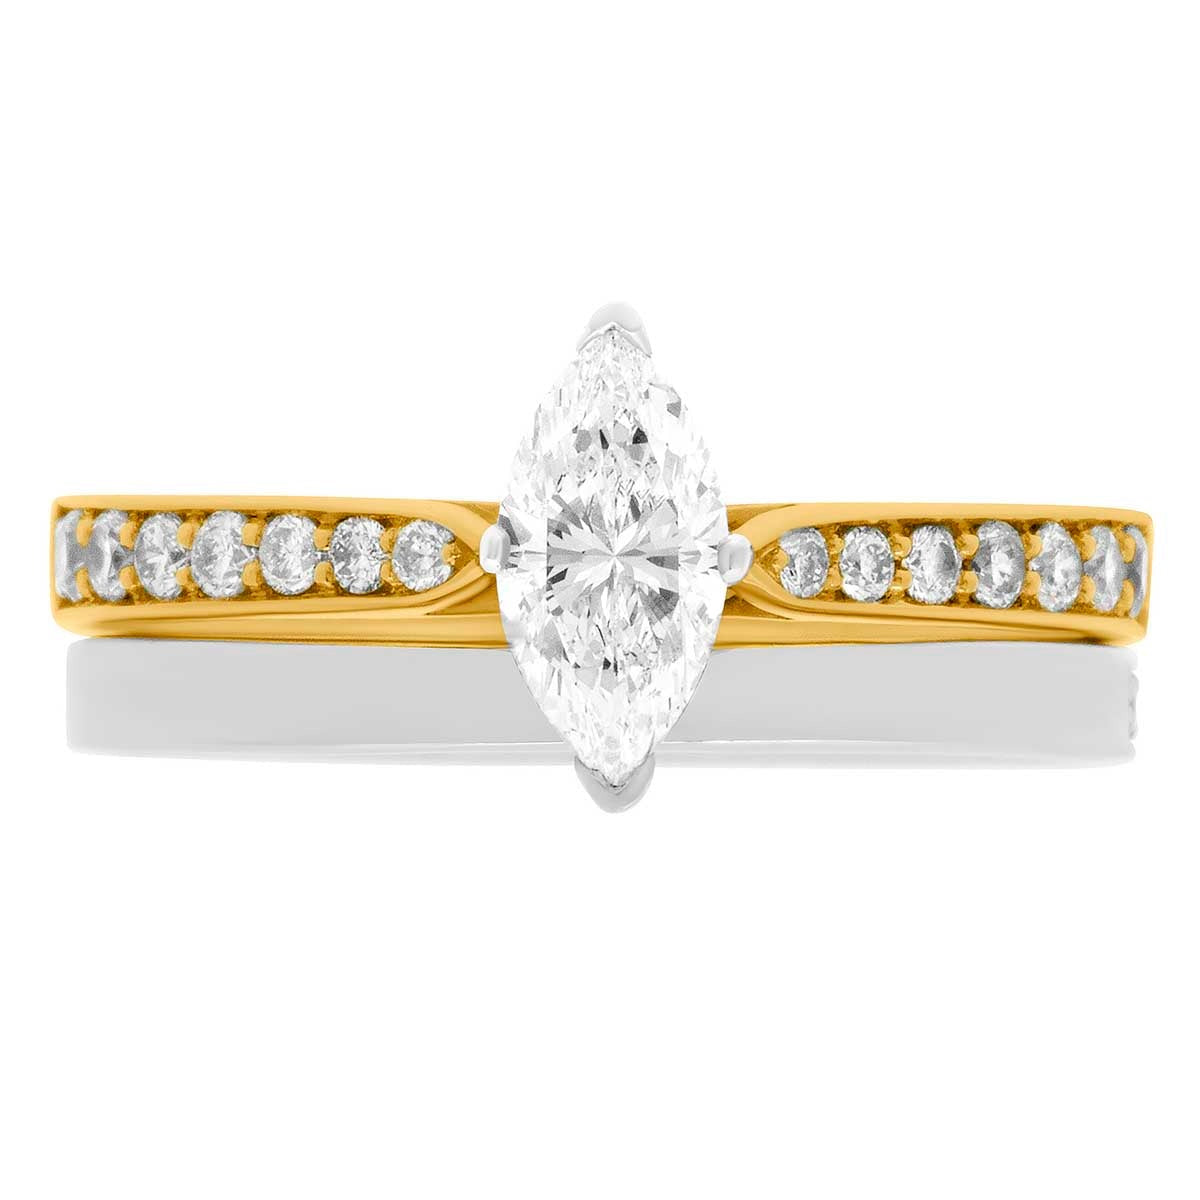 Marquise Engagement Ring made from 18 karat yellow gold with a plain wedding ring